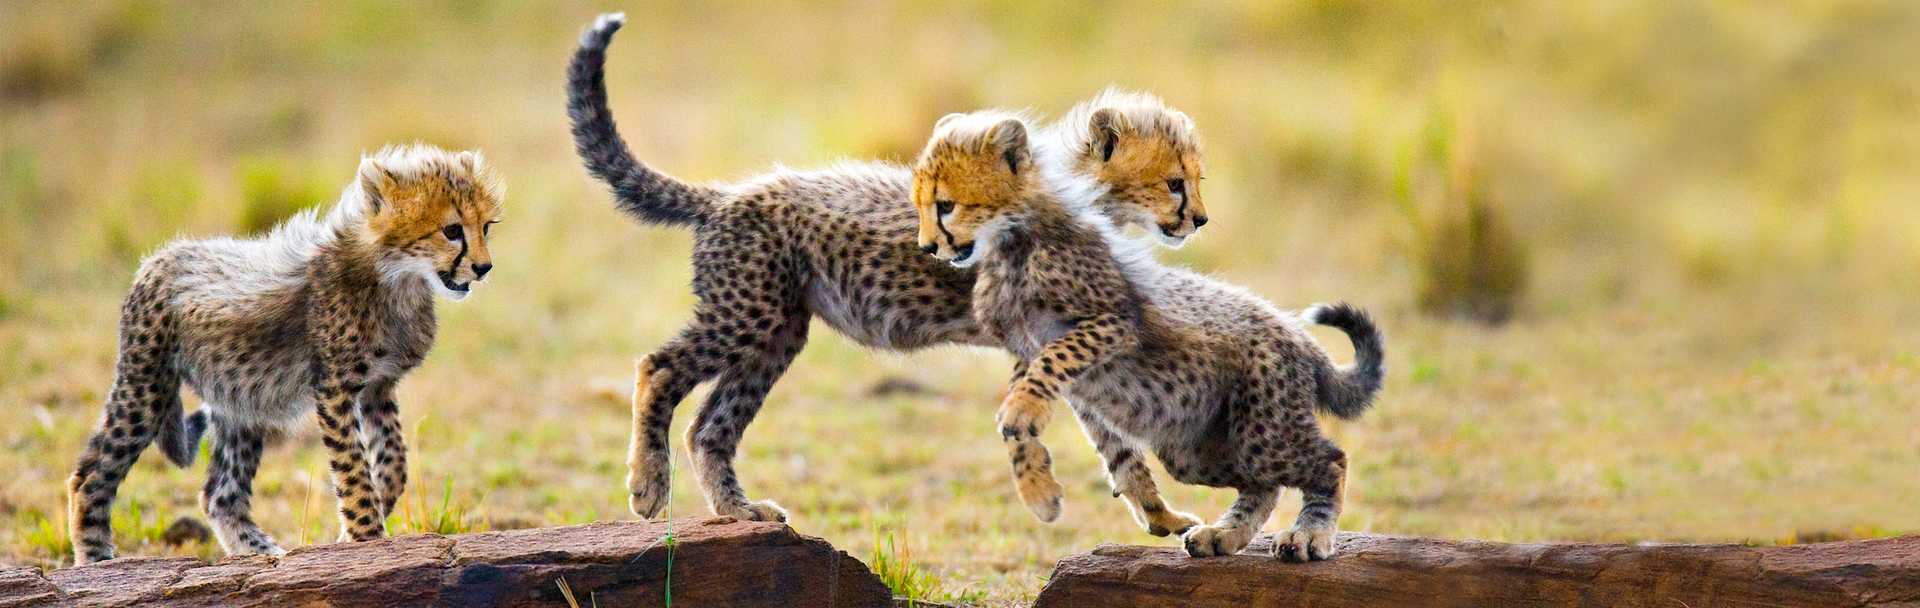 Three cheetah cubs playing in Kruger National Park, South Africa